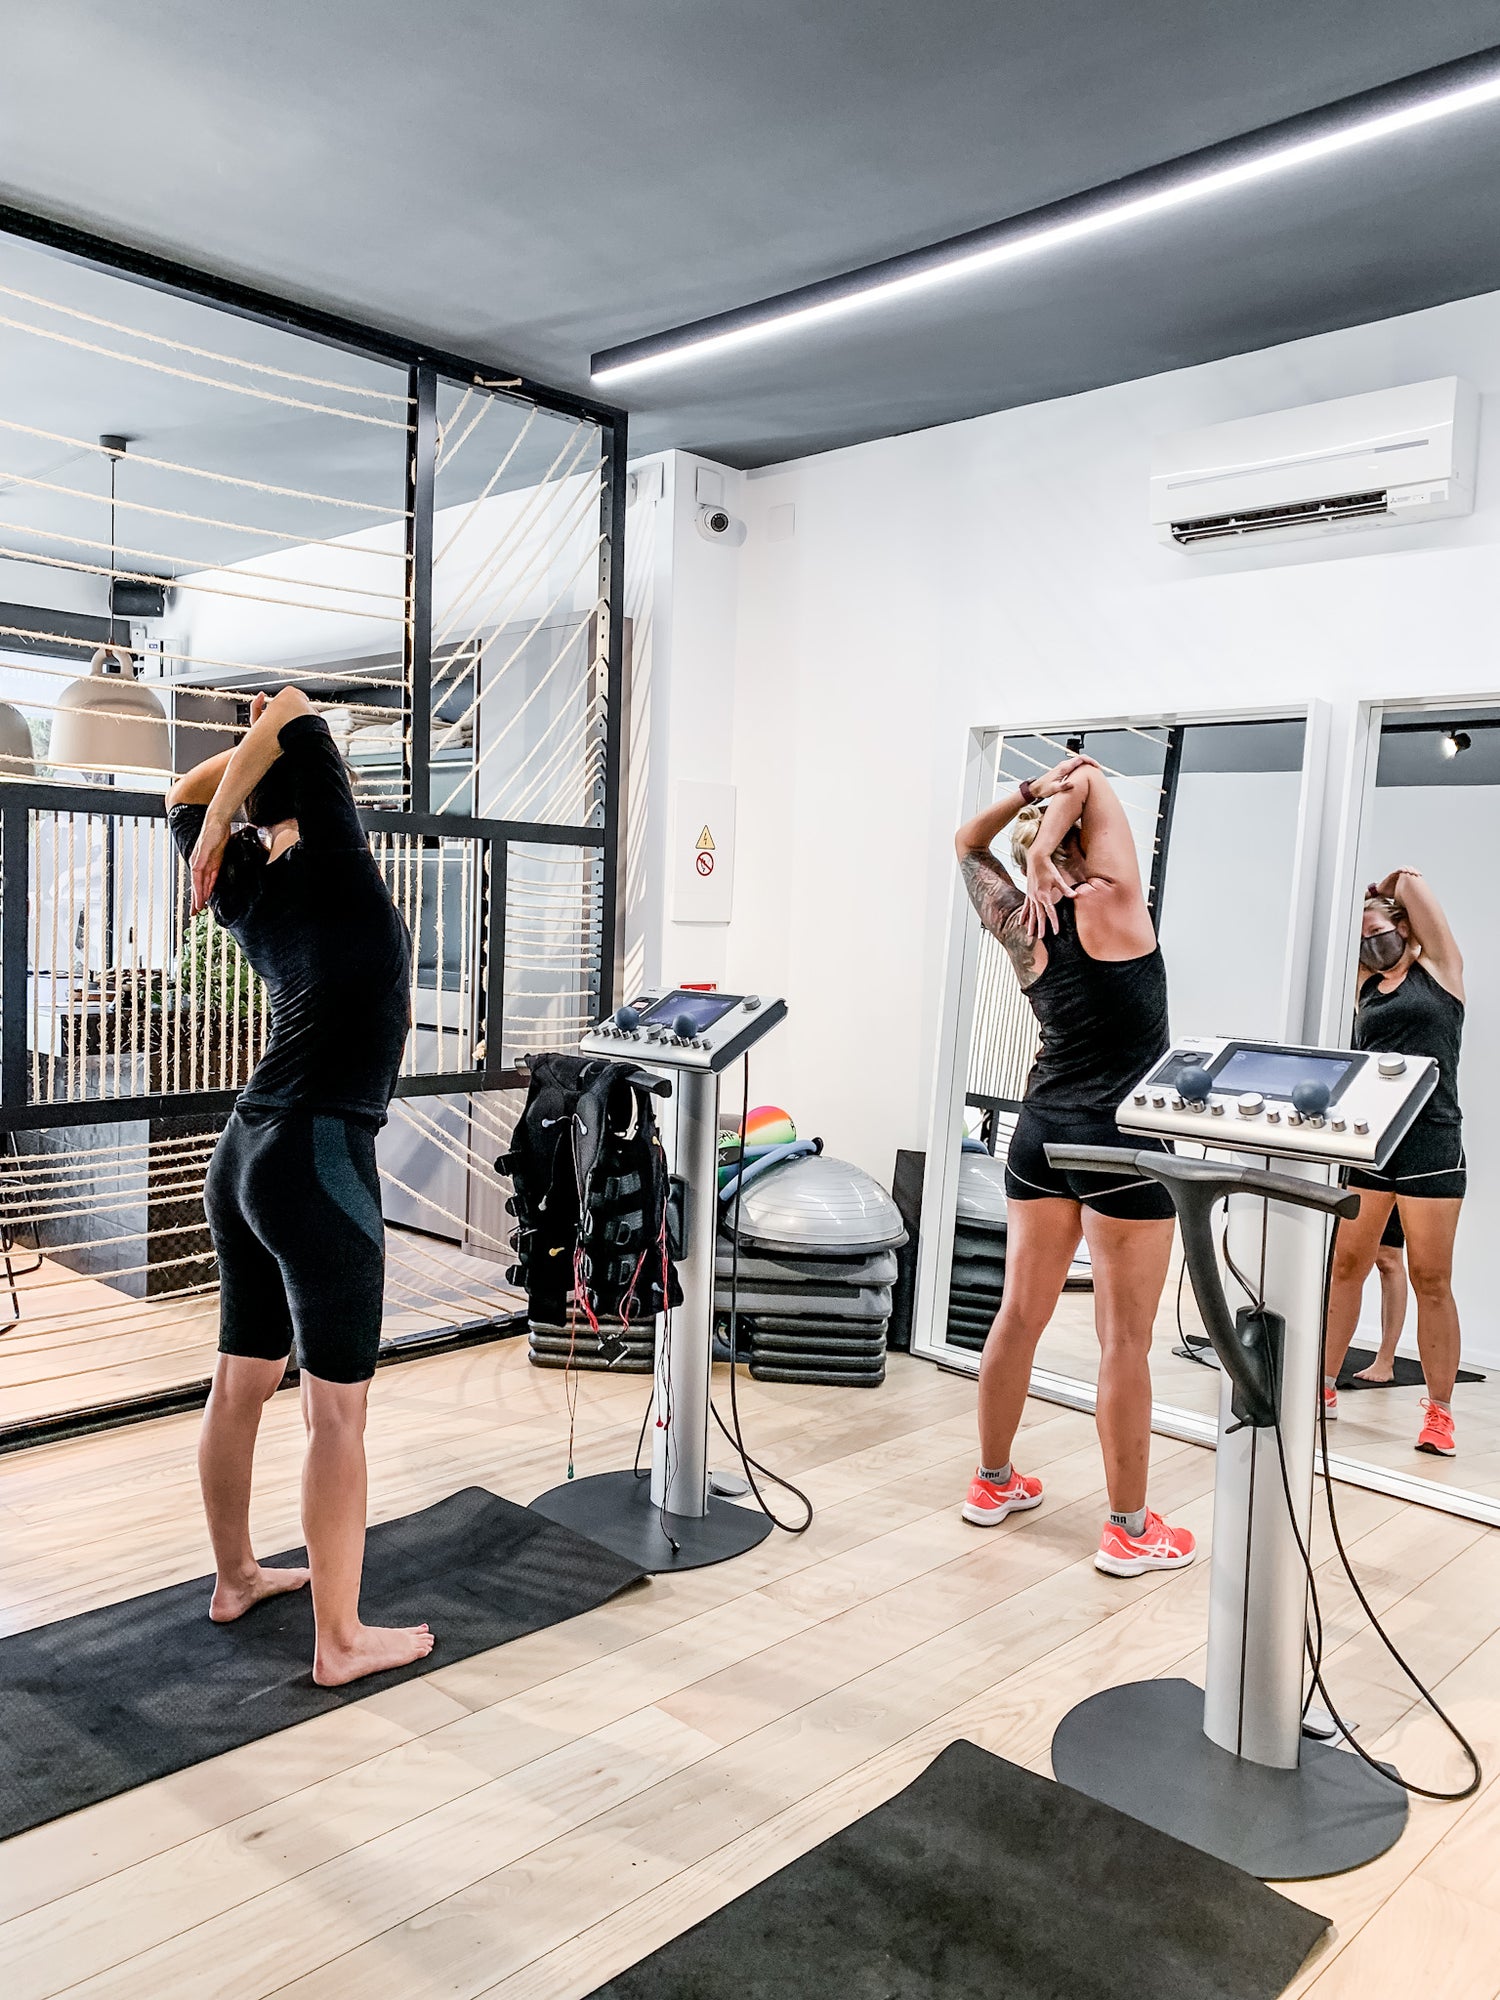 At Speedfitness, we believe in the “try before you buy” approach. While EMS Fitness training can benefit just about anyone, we recognize that it is a new way of personal training and you may not be aware of the benefits. Portals Nous Mallorca 